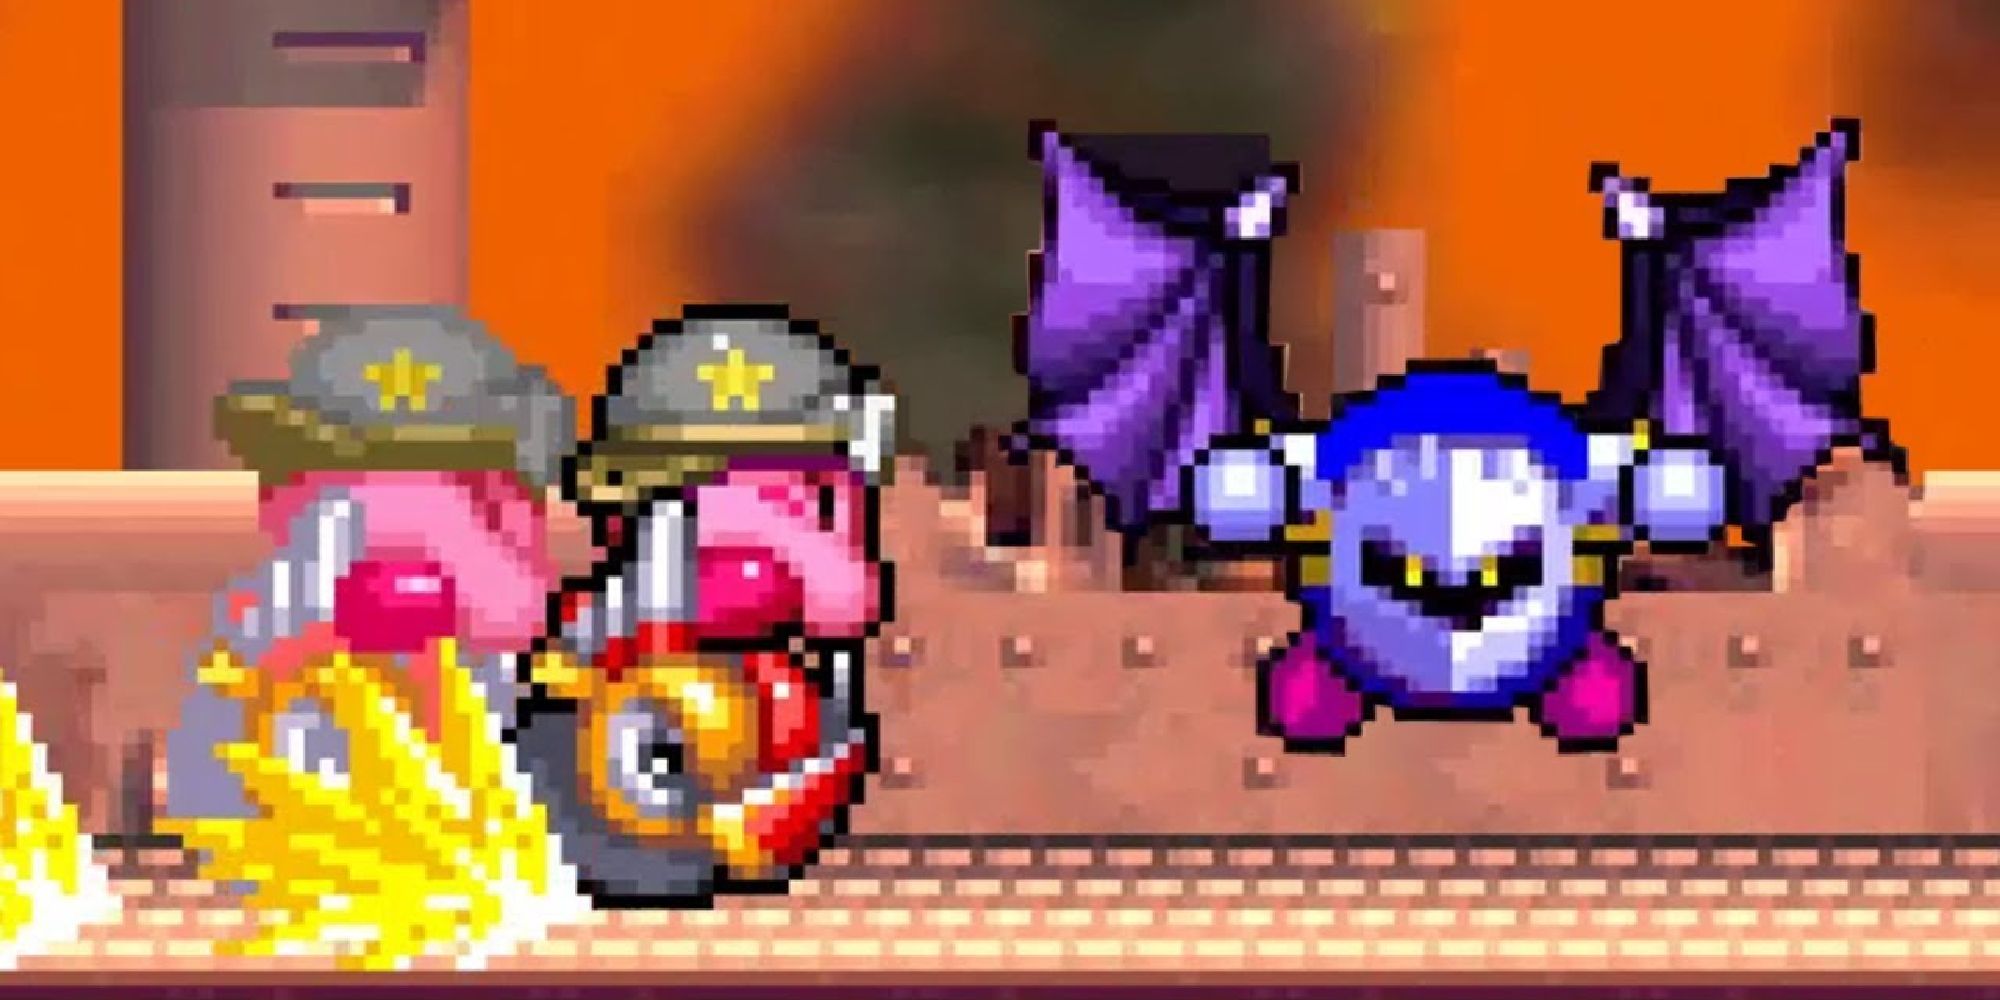 Kirby riding a Wheel enemy during a boss fight with Meta Knight in Super Star Ultra